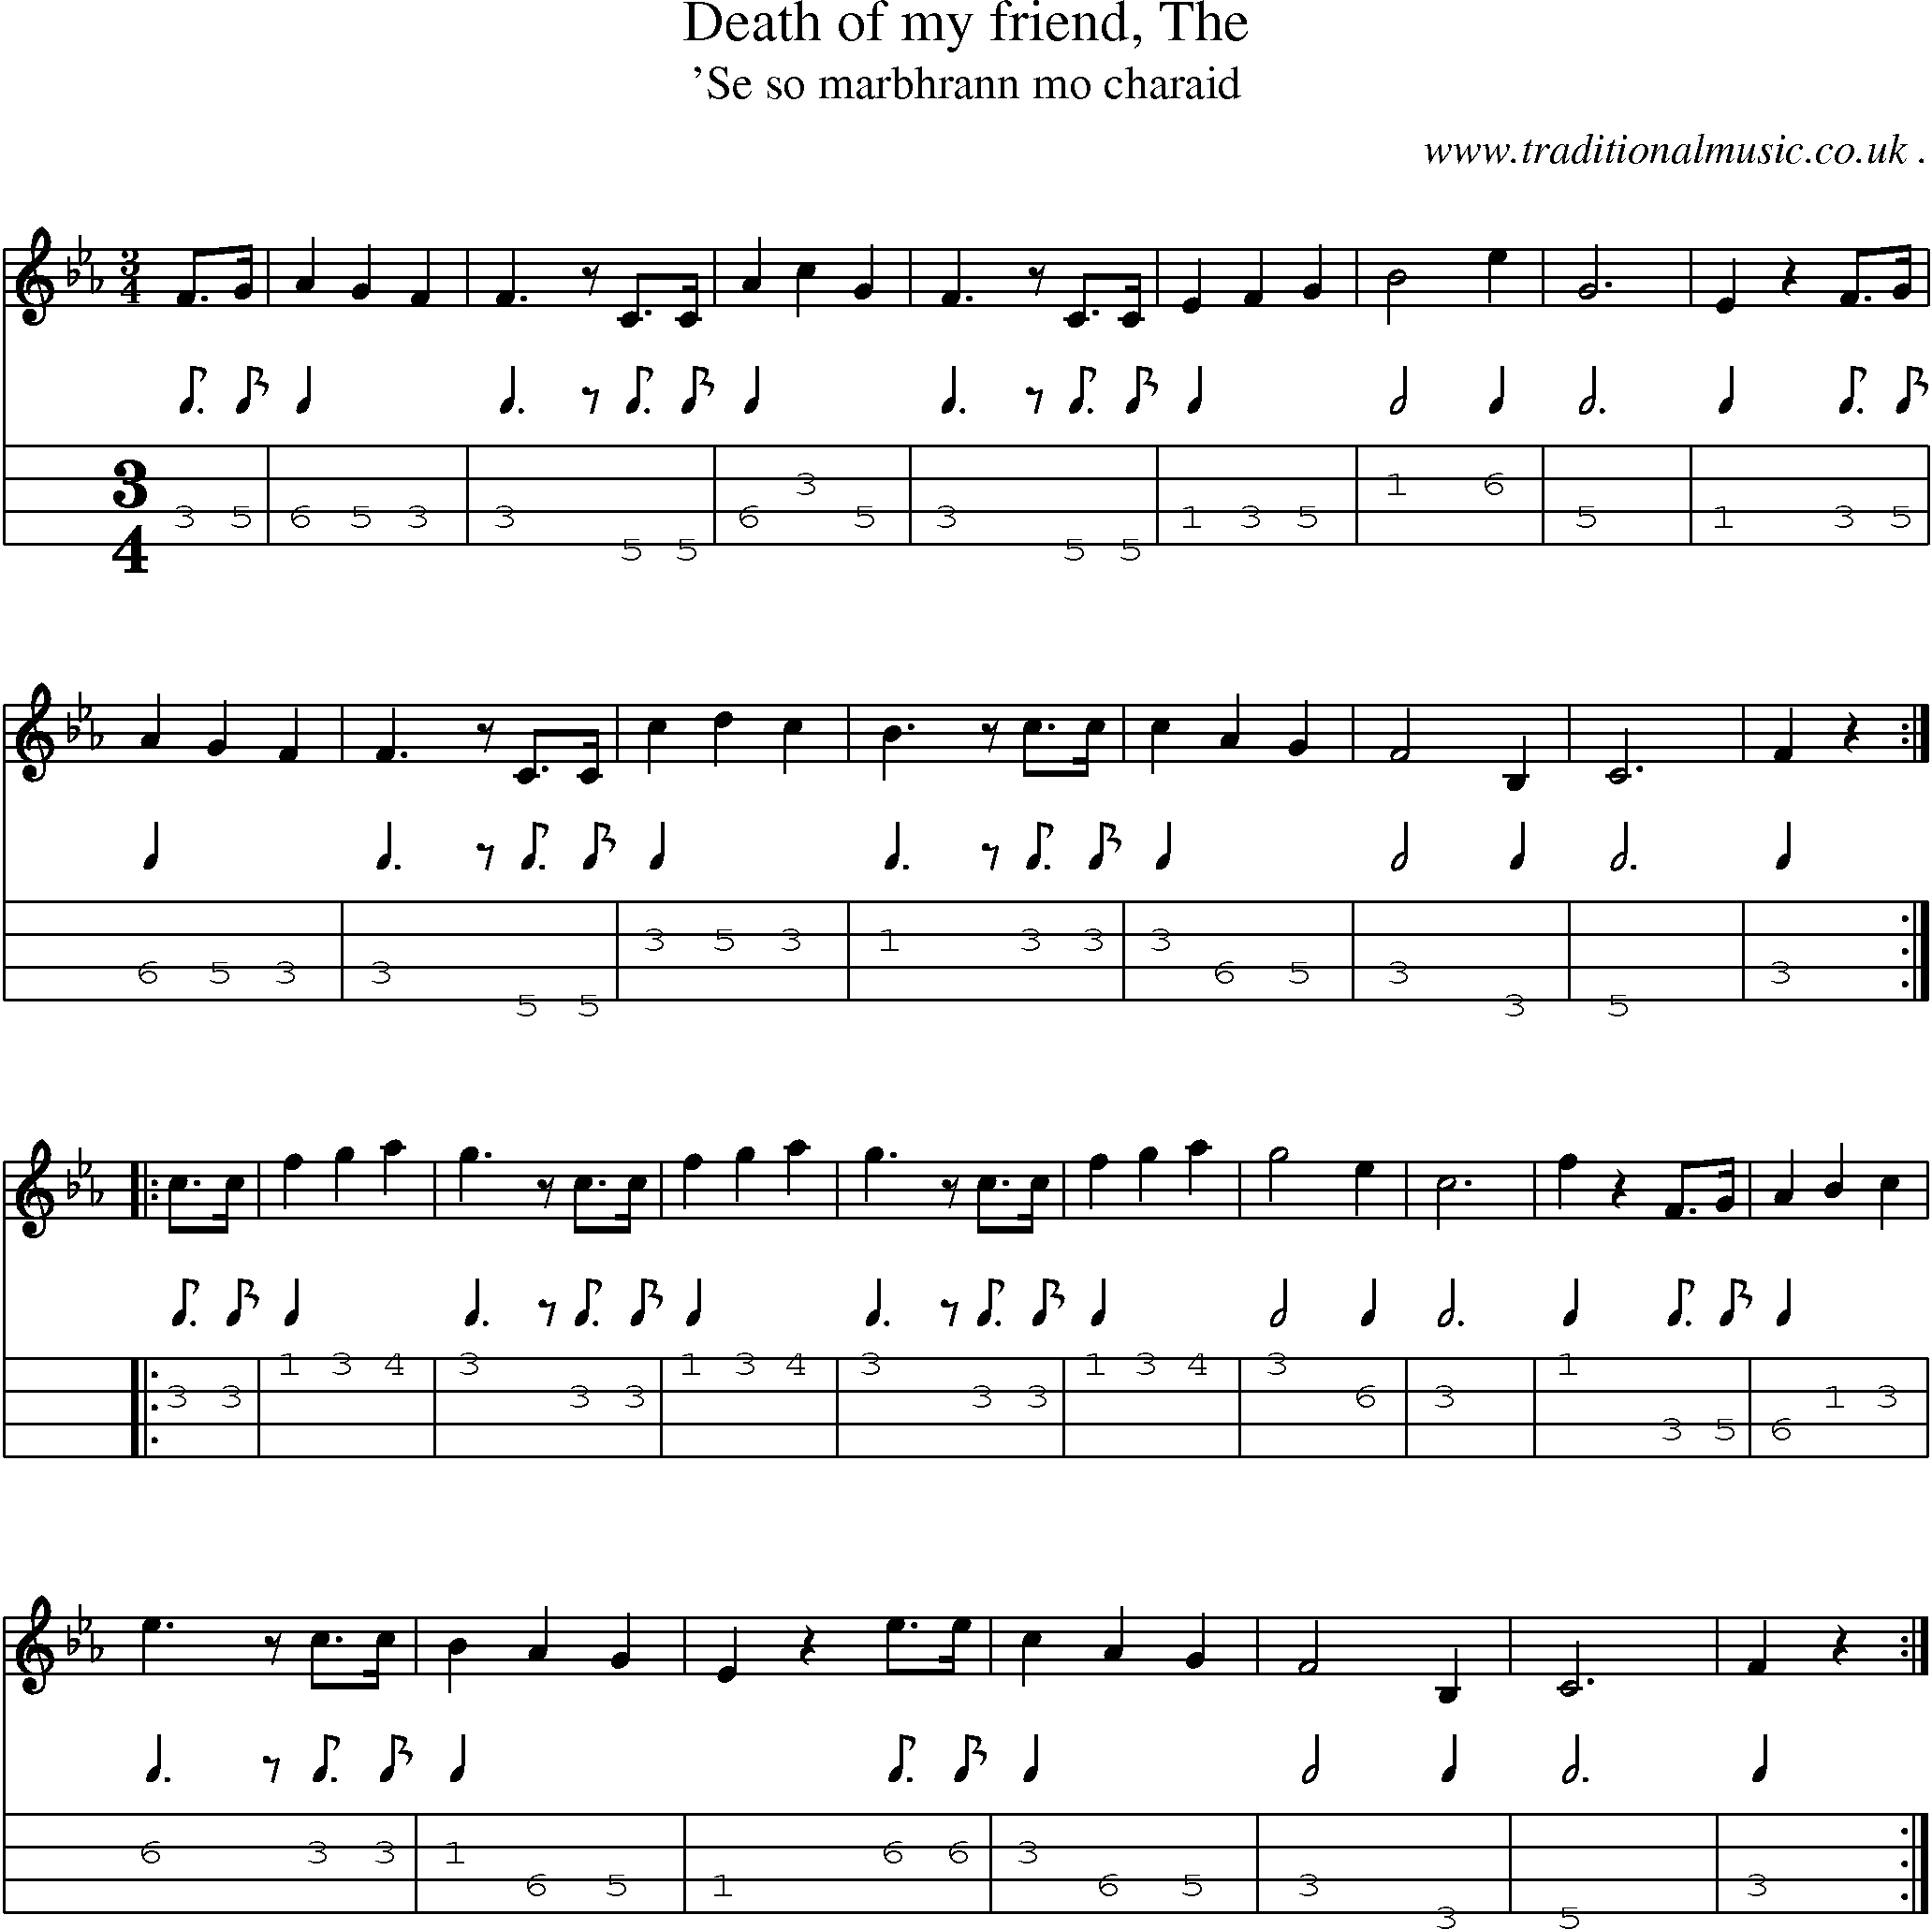 Sheet-music  score, Chords and Mandolin Tabs for Death Of My Friend The